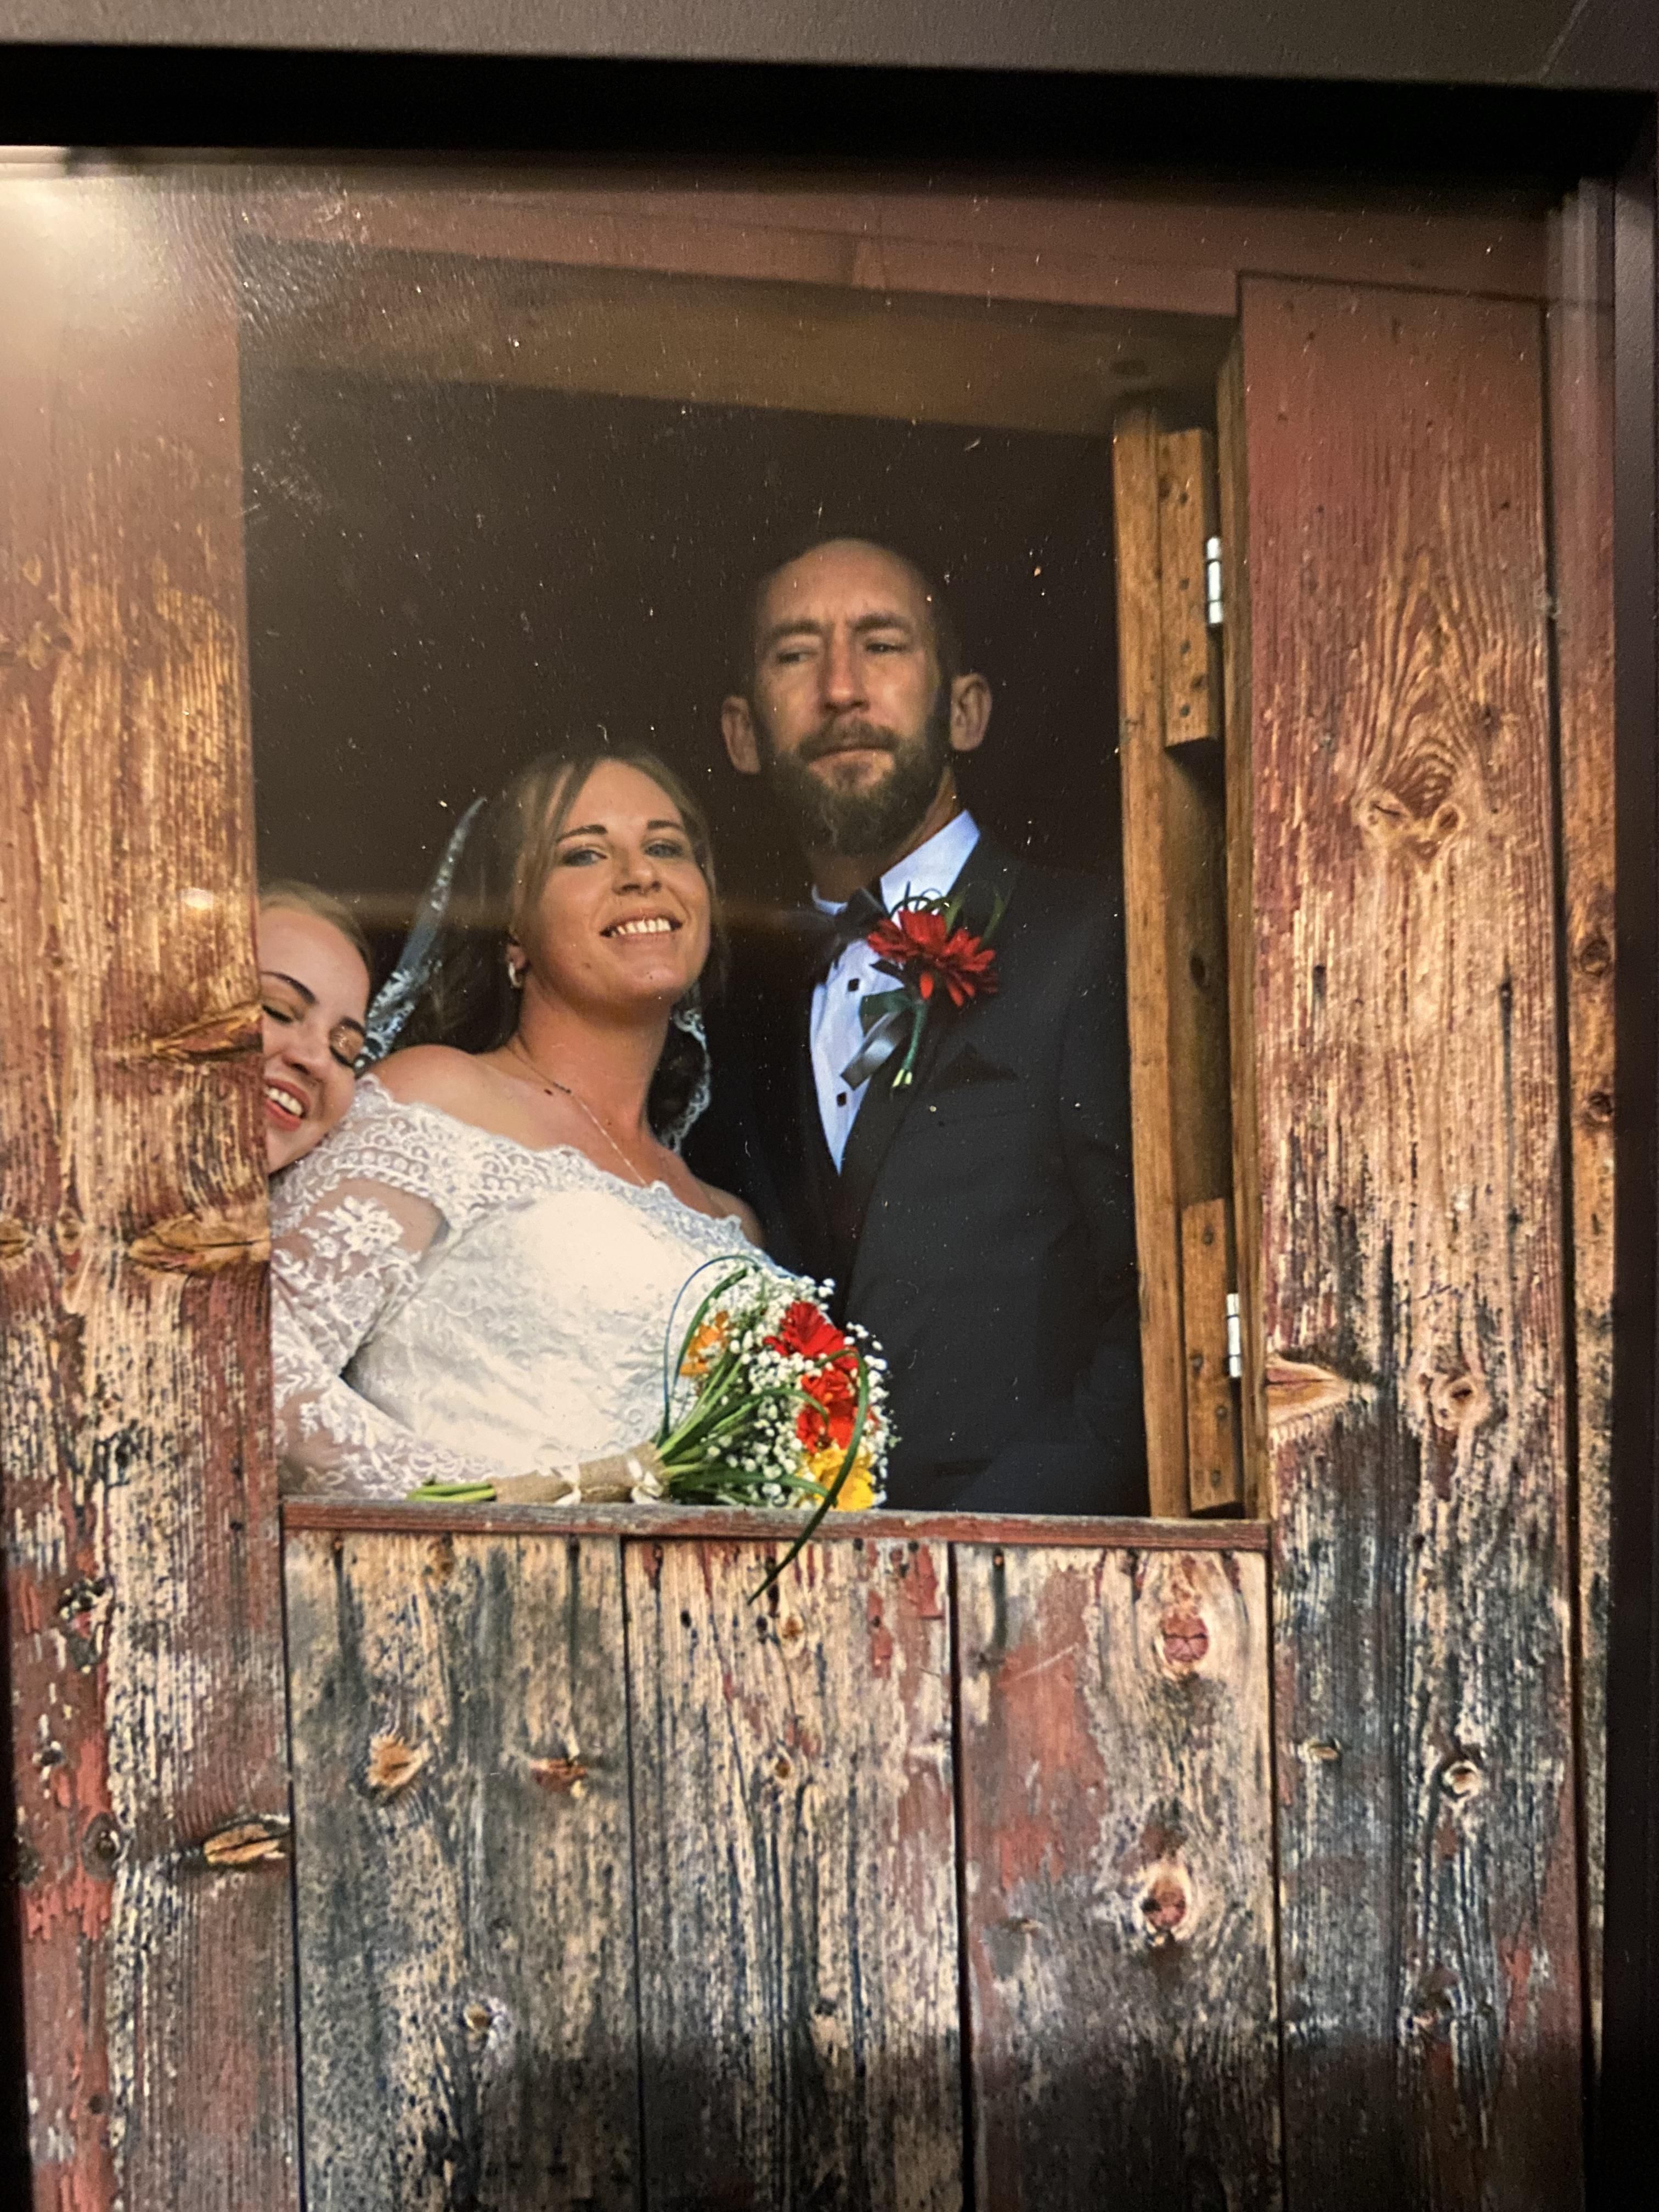 My friends got married. Did NOT know they were taking a photo in the window and photobombed the pic.